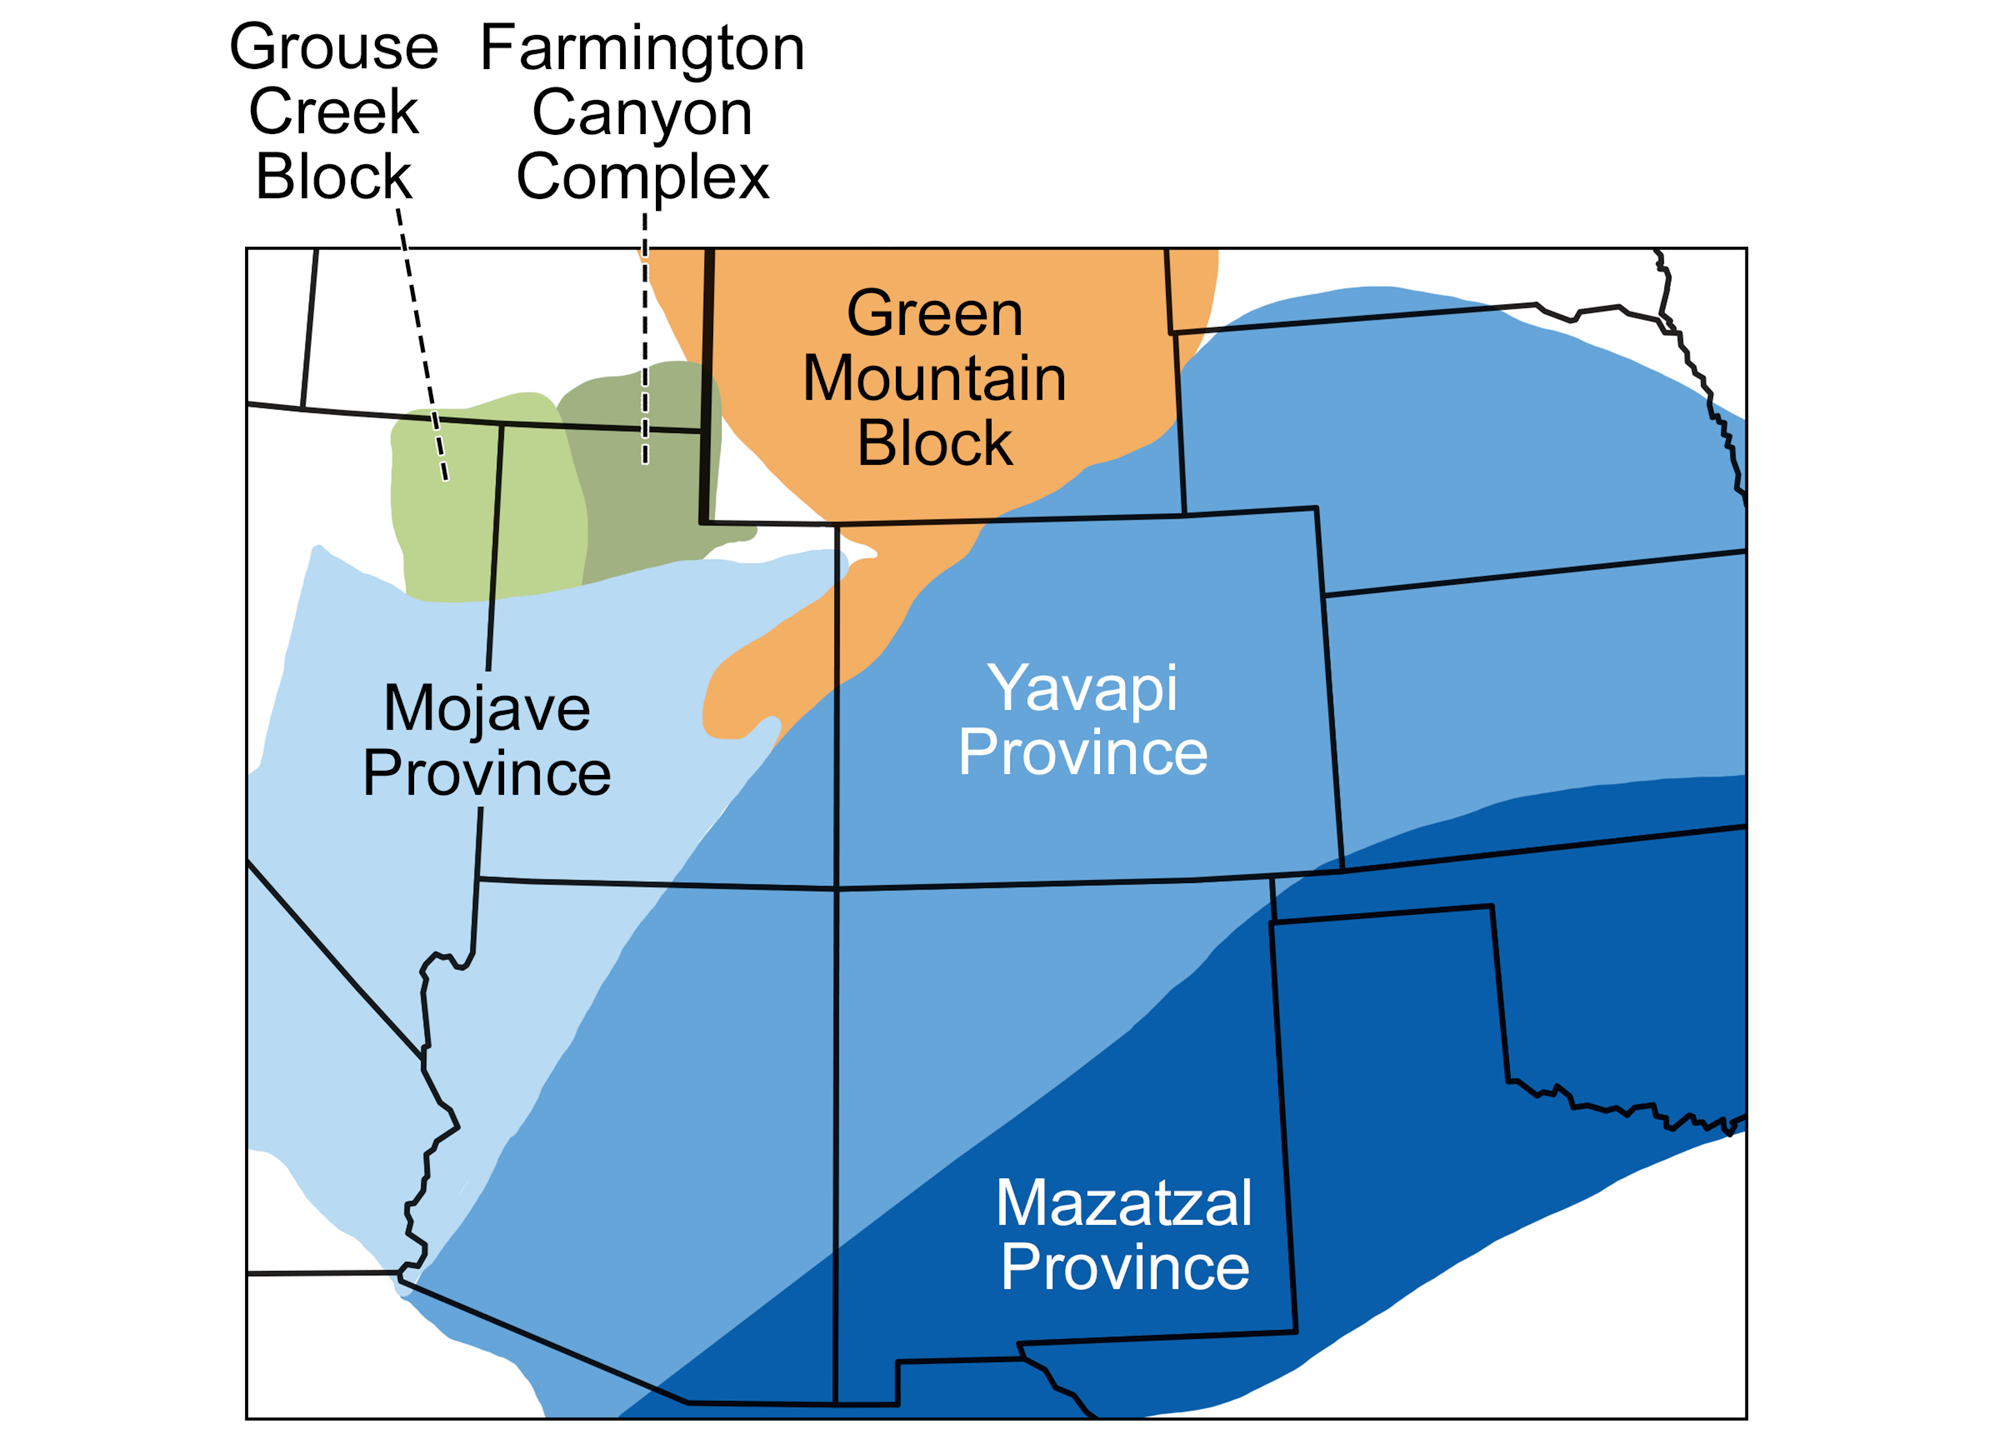 Map showing the cratonic elements that make up the basement rock of the southwester US. The Mazatzal, Yavapai, and Mojavae provinces underlie most of the southwestern U.S., with the Mazatzal furtherest south (southeast Arizona, New Mexico), the Yavapai about it (Arizona, northwestern New Mexico, southeastern Utah, most of Colorado), and the Mojave Province to the west (Utah, Arizona). The Grouse Creek Block and Farmington Canyon Complex occur in northern Utah. The Green Mountain Block extends into east-central Utah.